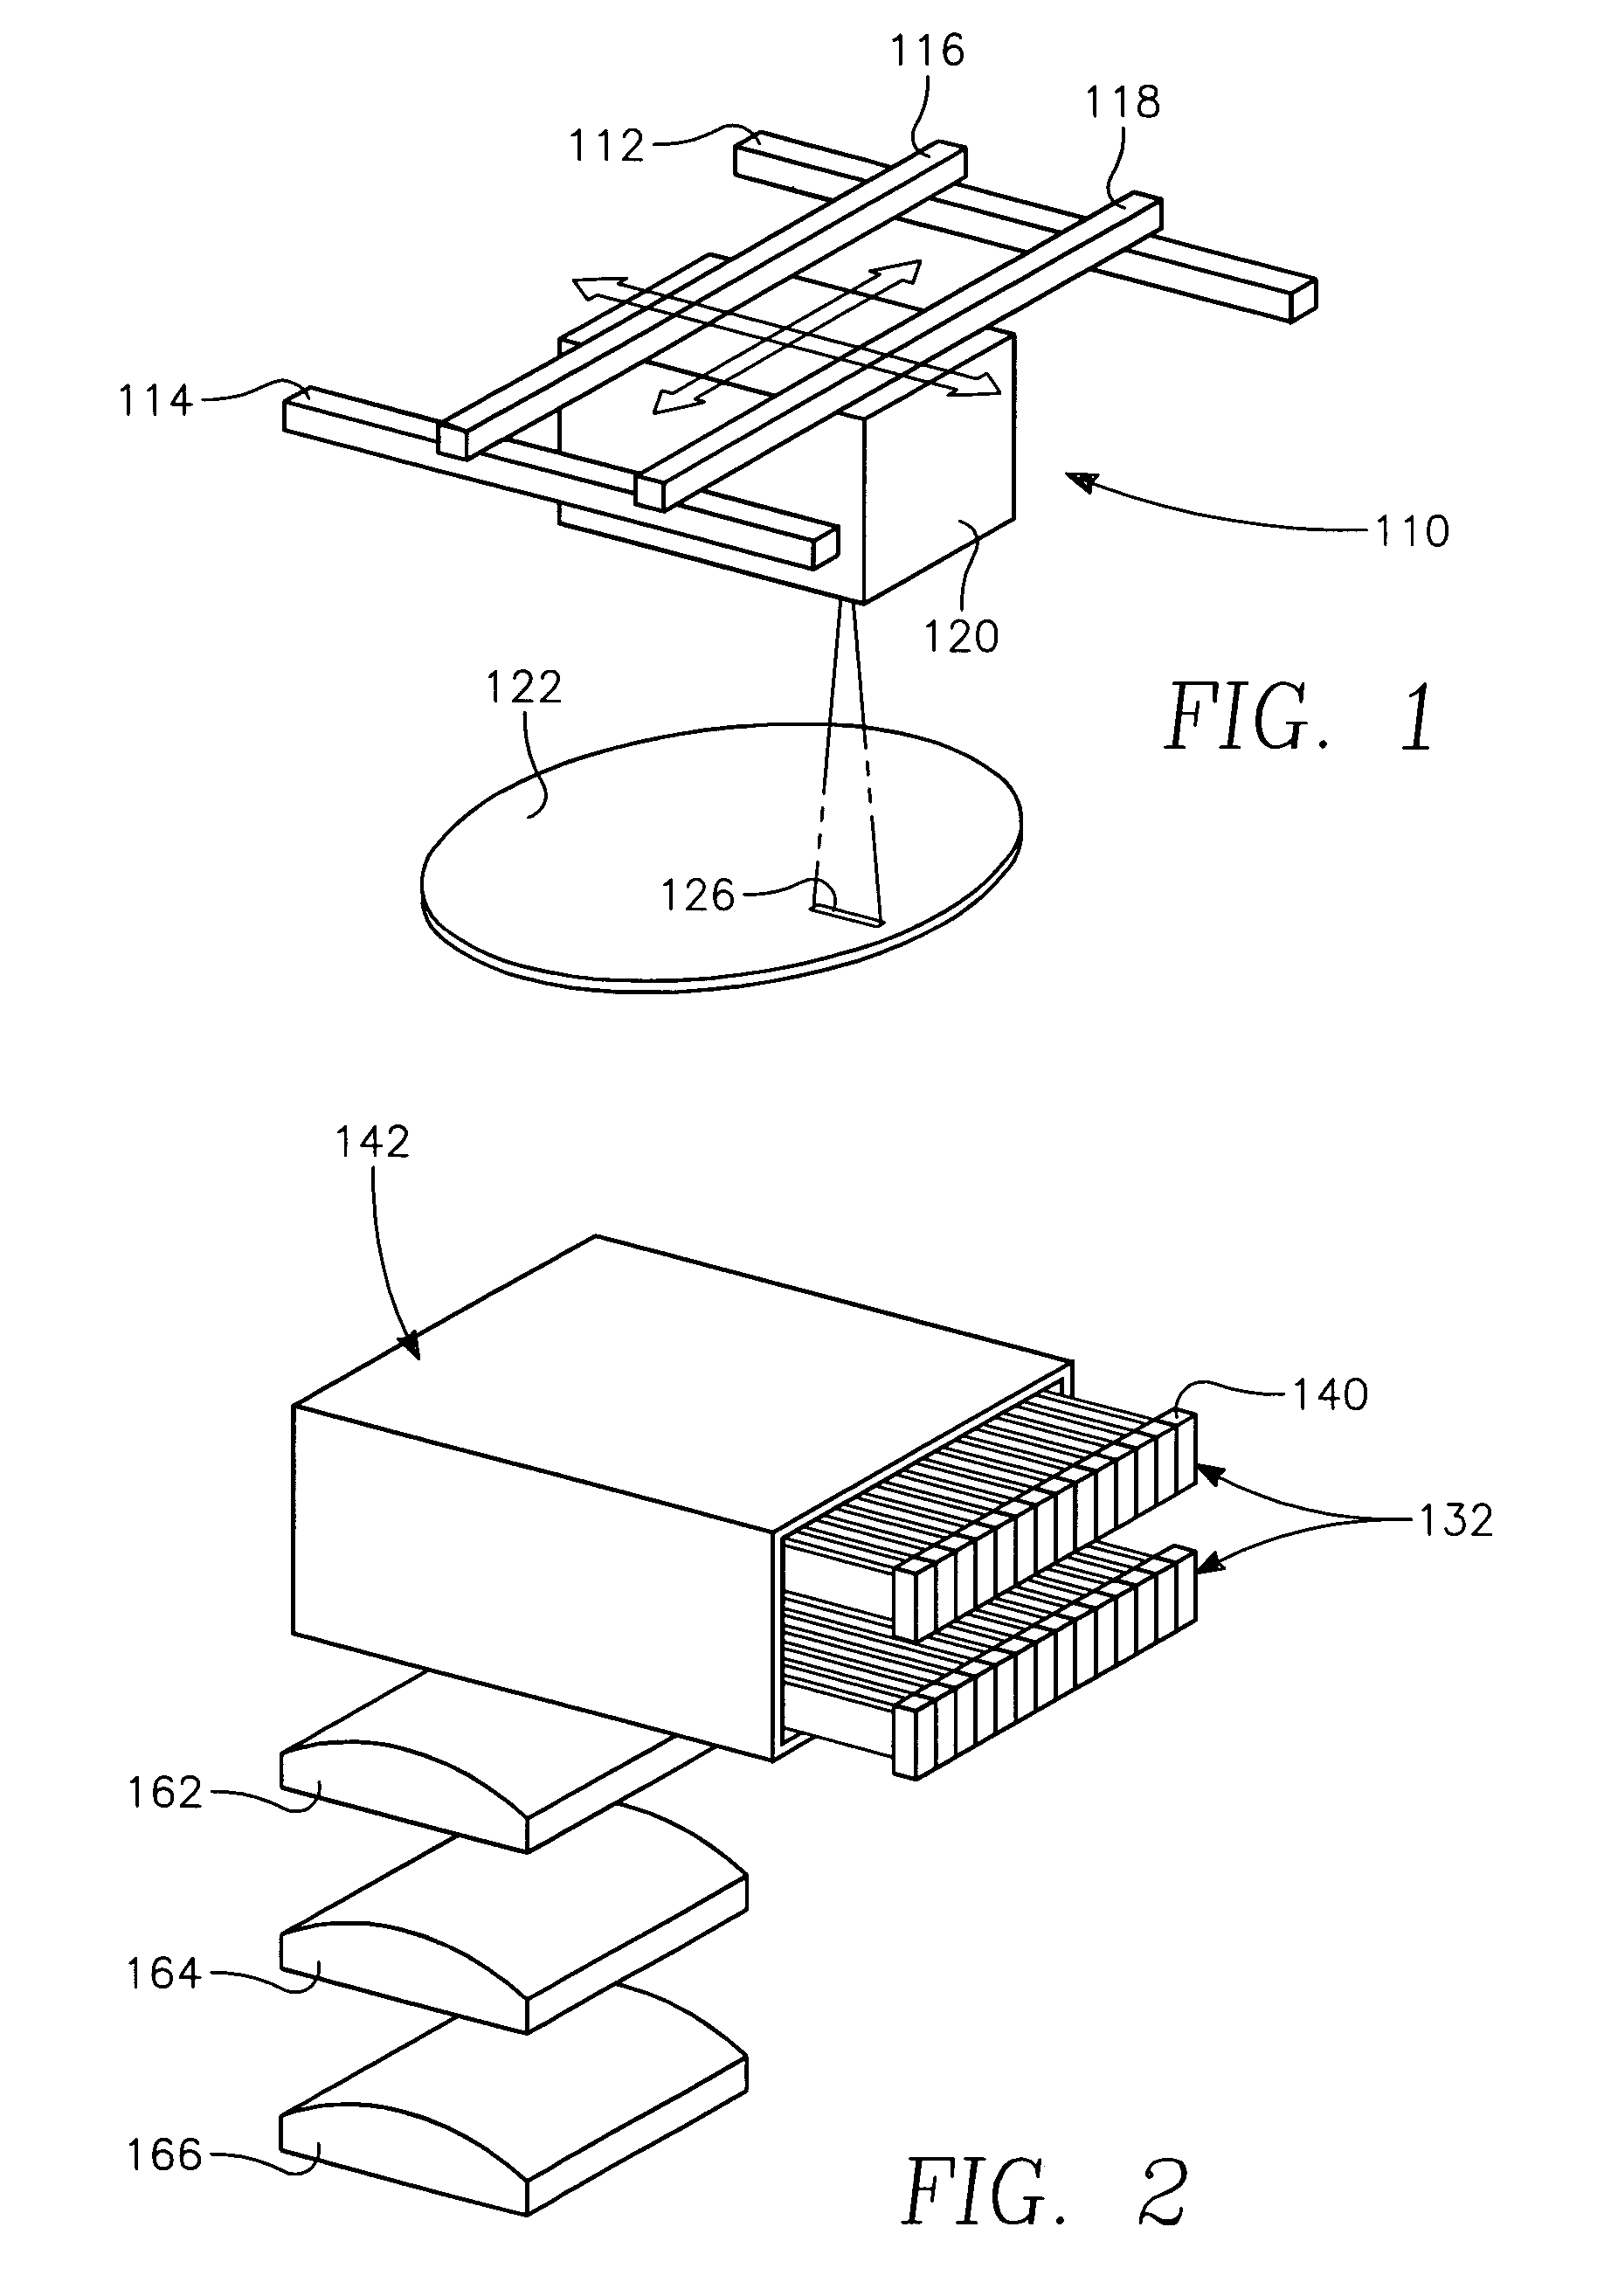 Copper conductor annealing process employing high speed optical annealing with a low temperature-deposited optical absorber layer